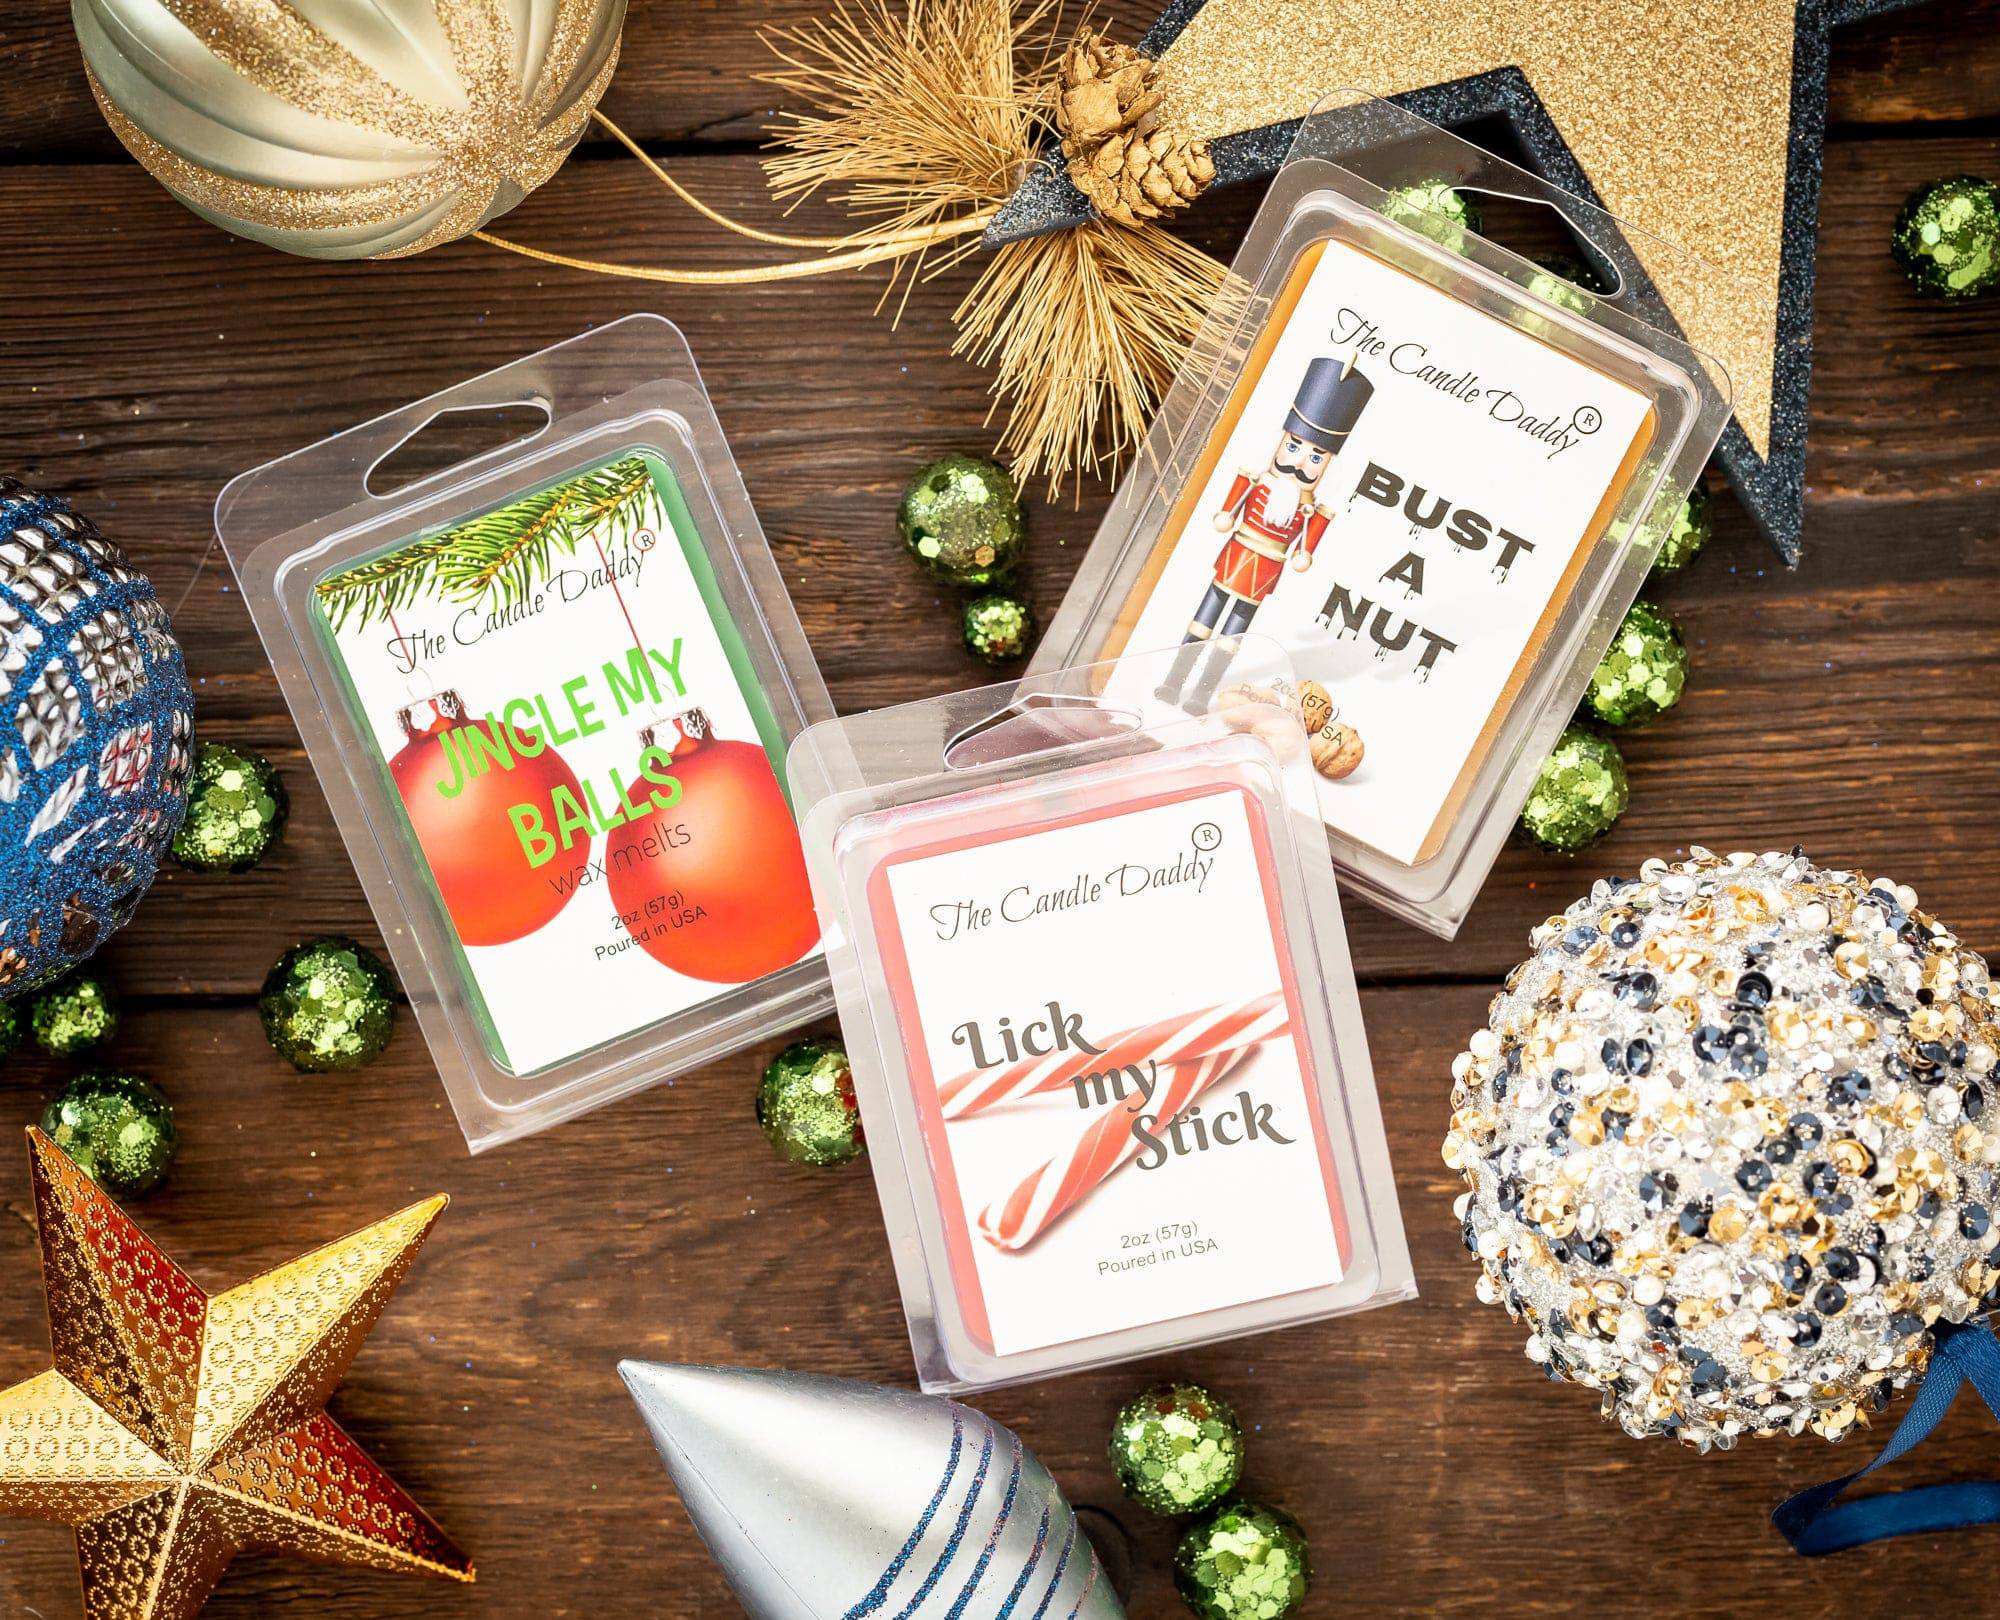 Top 15 Best Selling Wax Melts Scents 